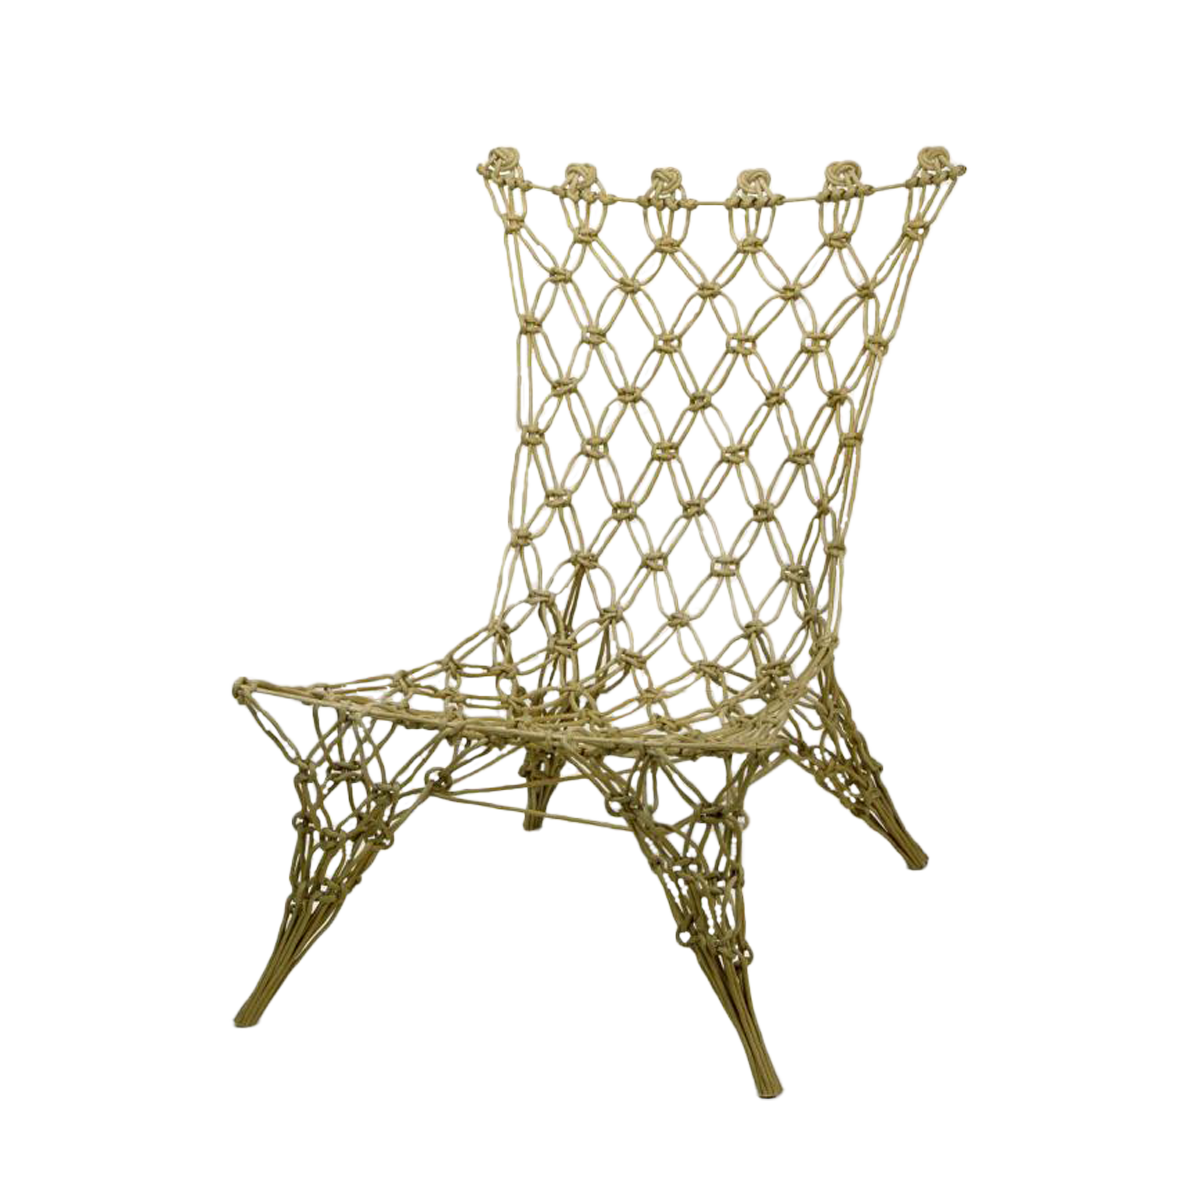 Knotted Chair by Marcel Wanders - Armchairs